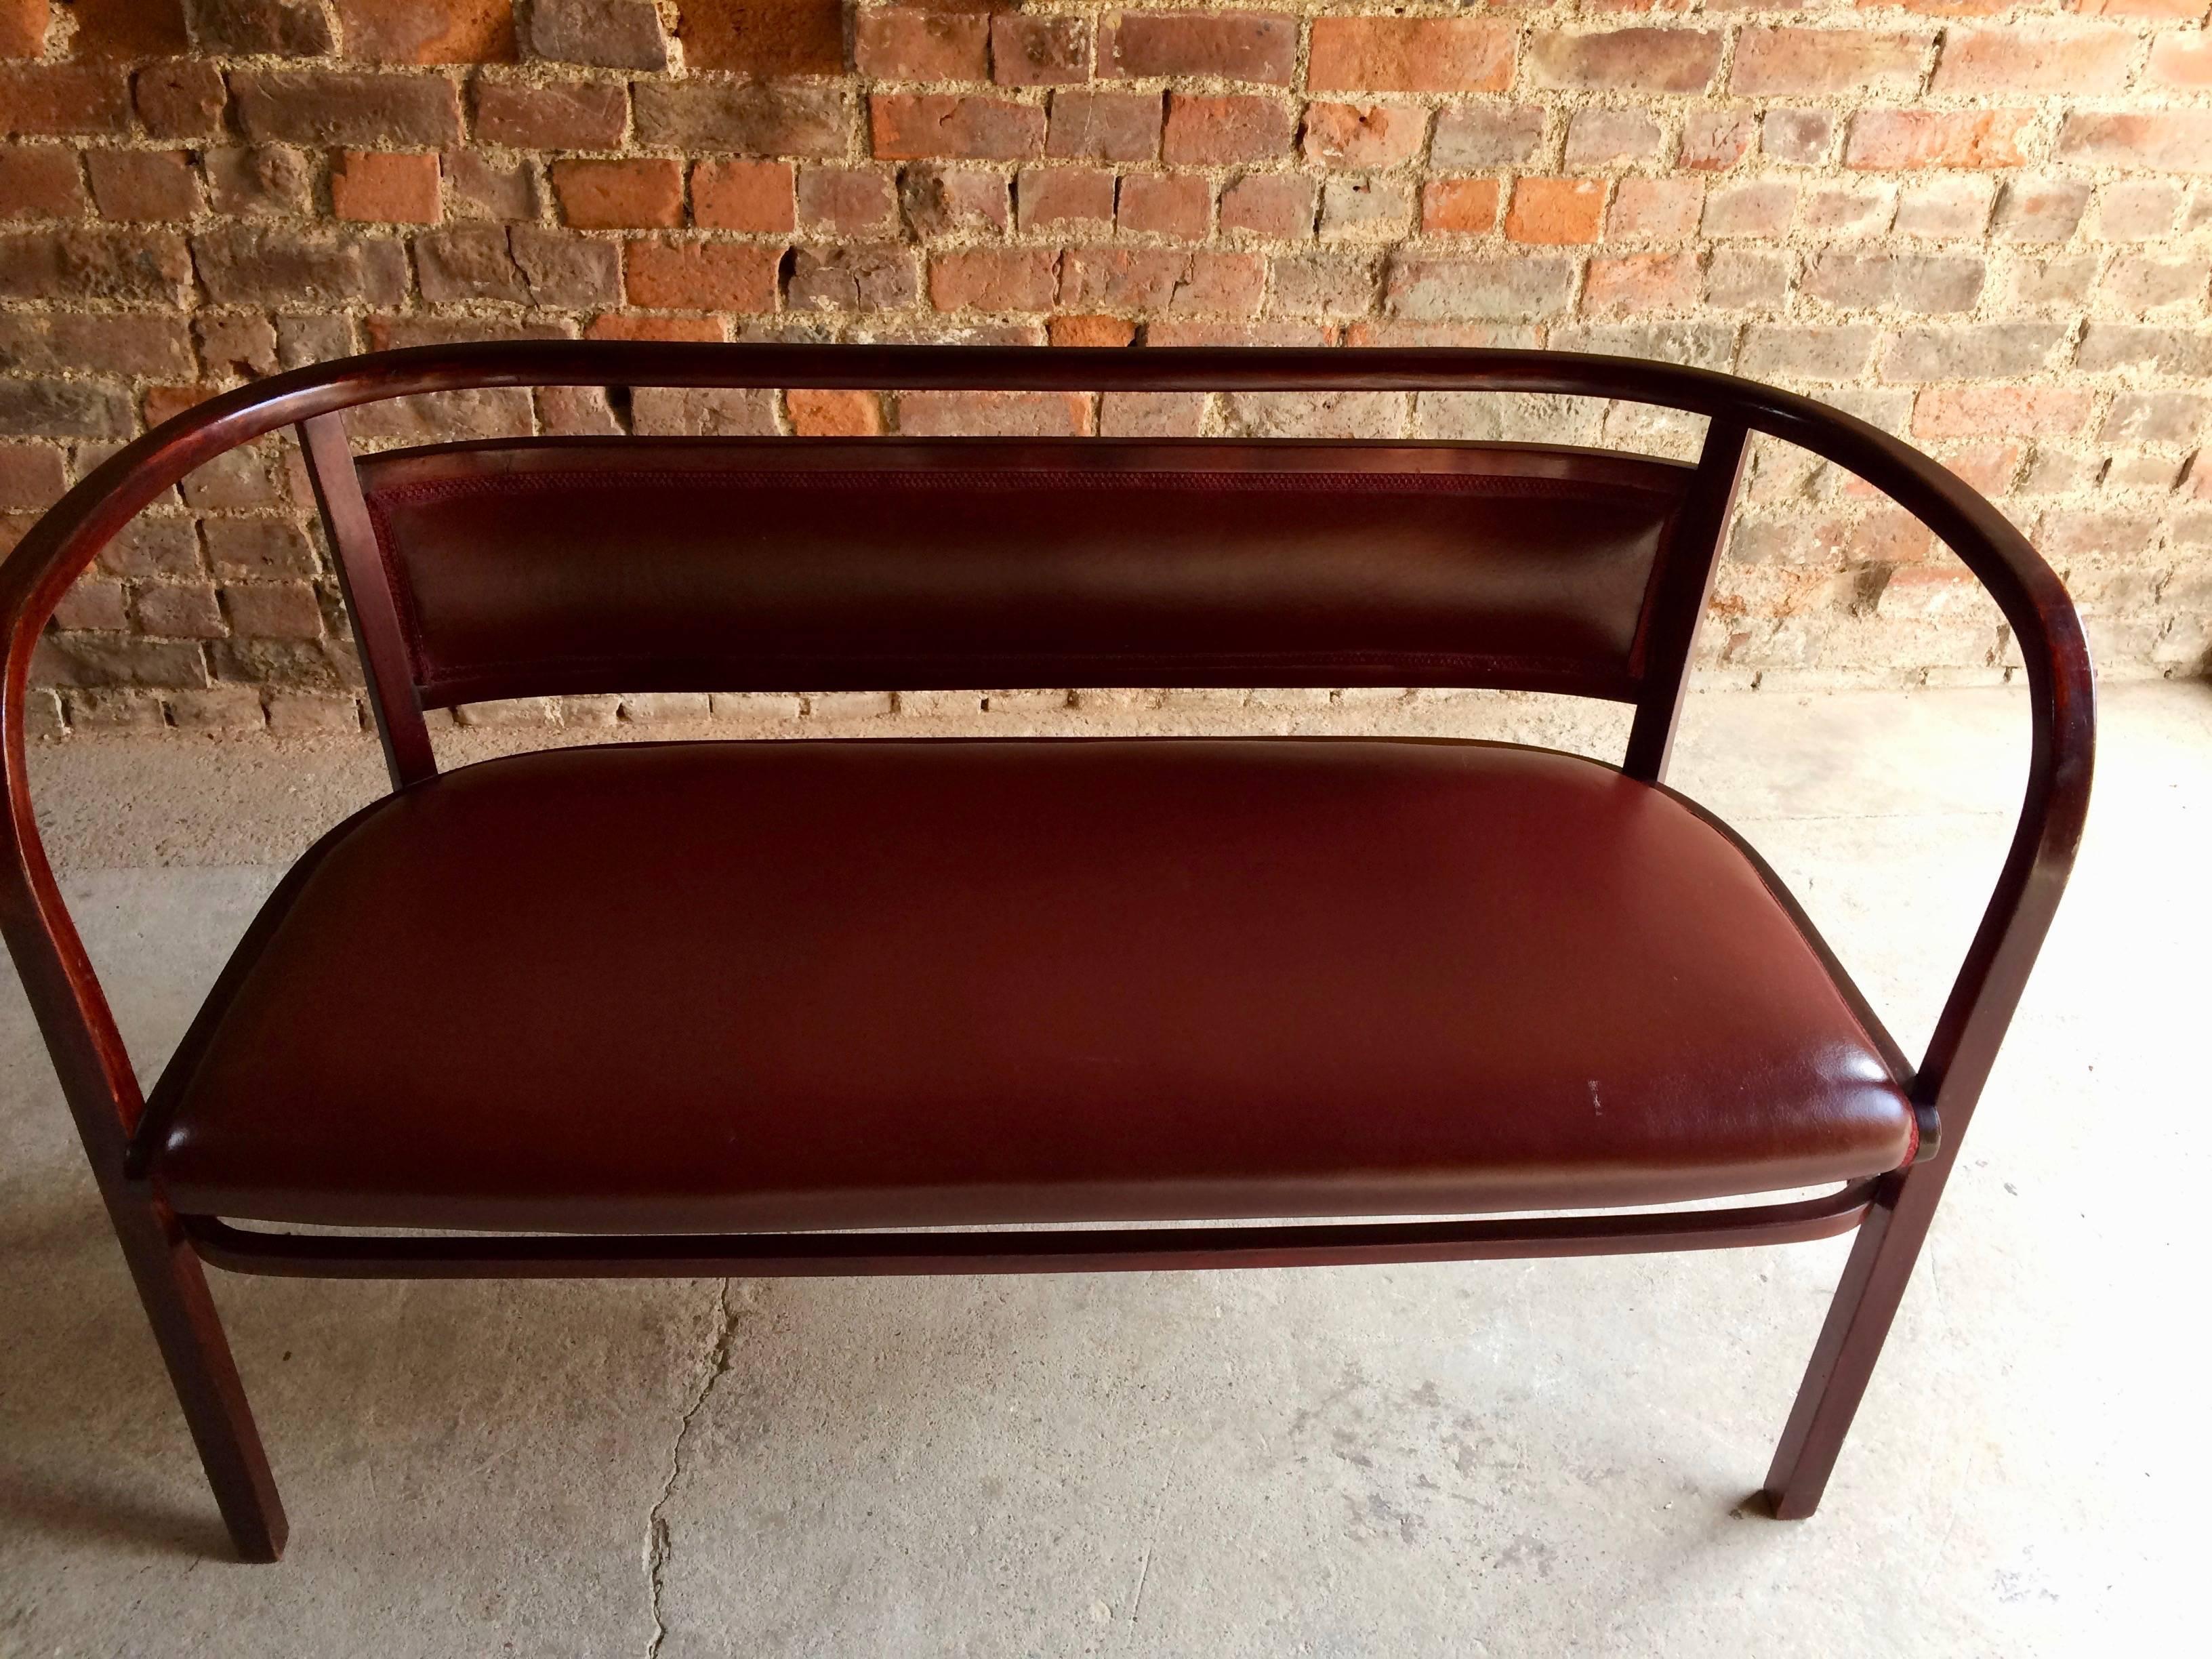 Aesthetic Movement Otto Wagner for Thonet Bentwood Sofa Bench, circa 1908 Model 3